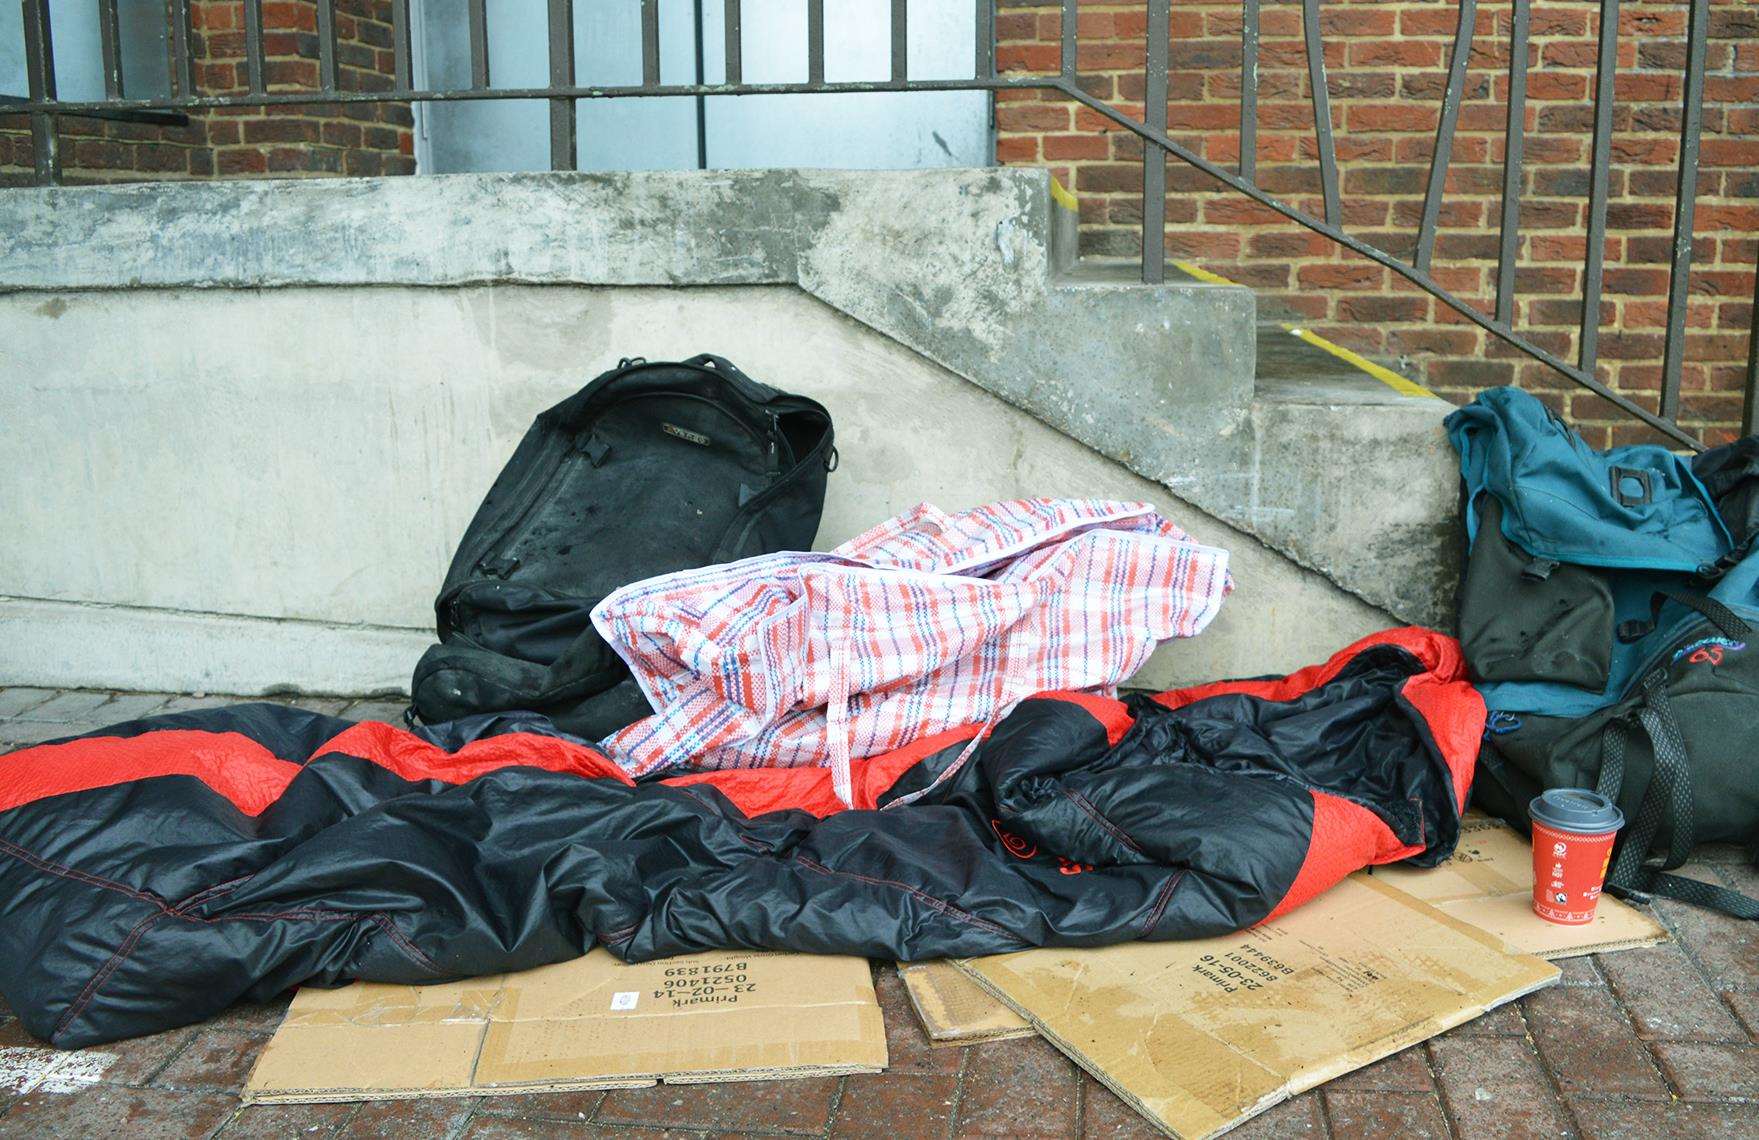 Homelessness is at an all-time high according to Porchlight